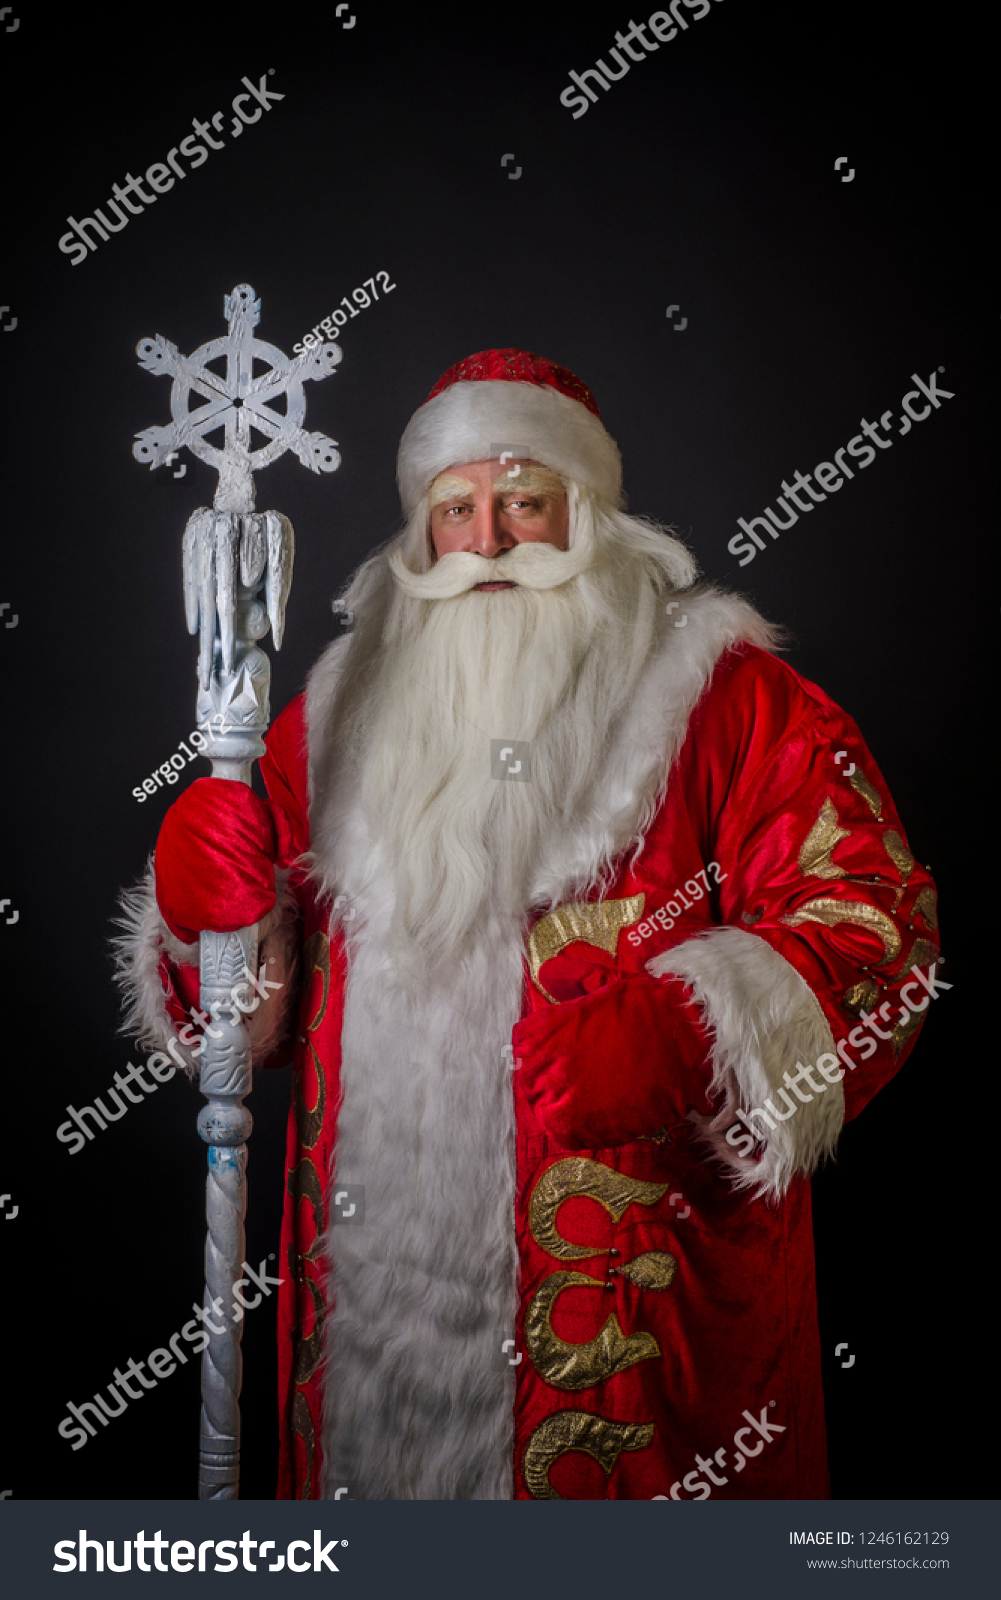 Santa Claus and Santa Claus on a black background. Santa Claus and Santa Claus are majestic and original with a staff on a black background. #1246162129